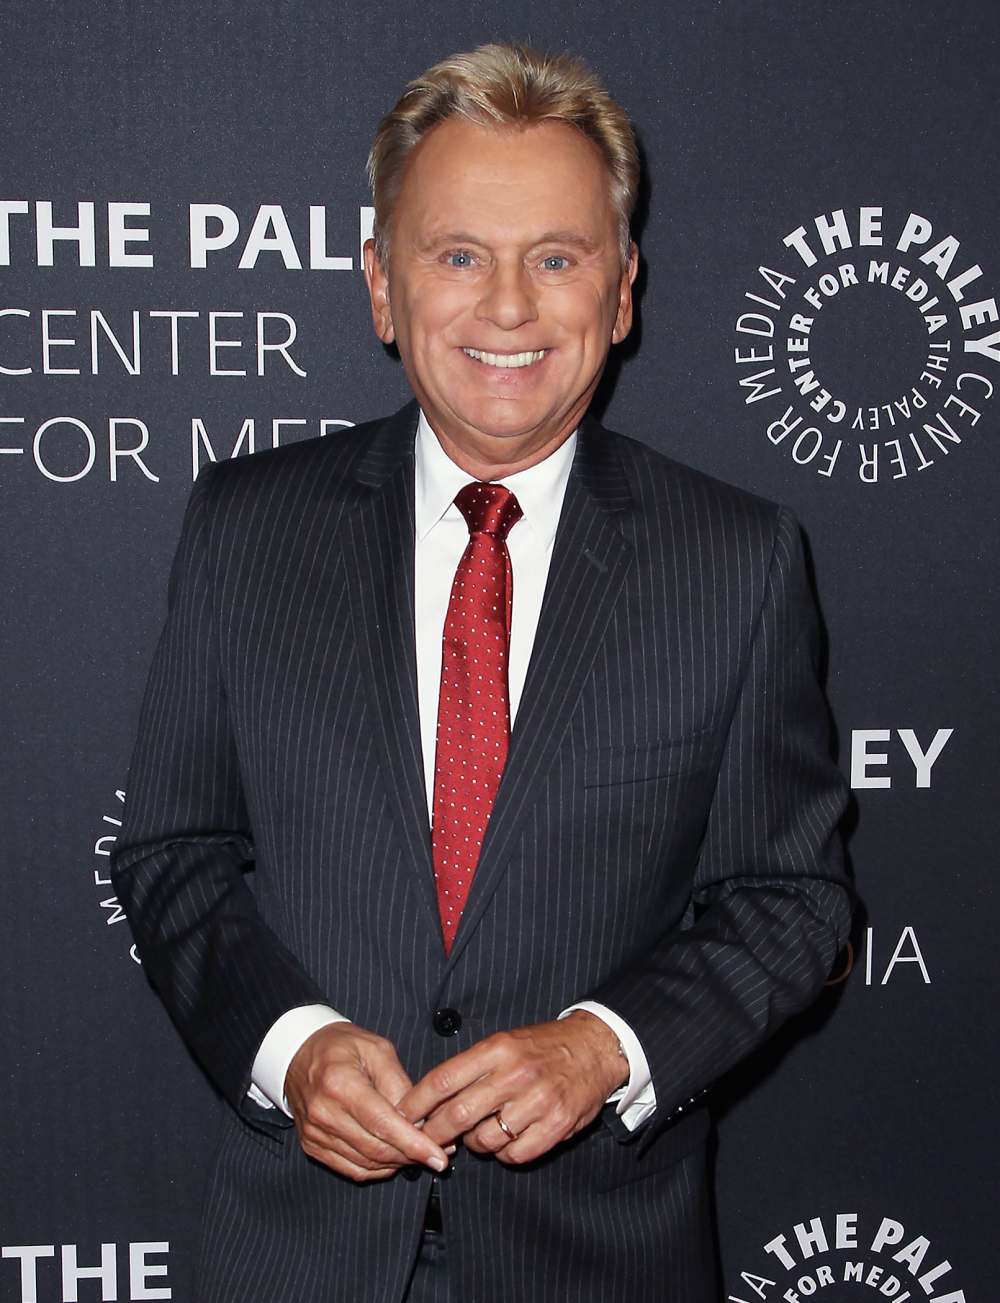 Watch 'Wheel of Fortune' Host Pat Sajak Accidentally Solve a Puzzle On-Air